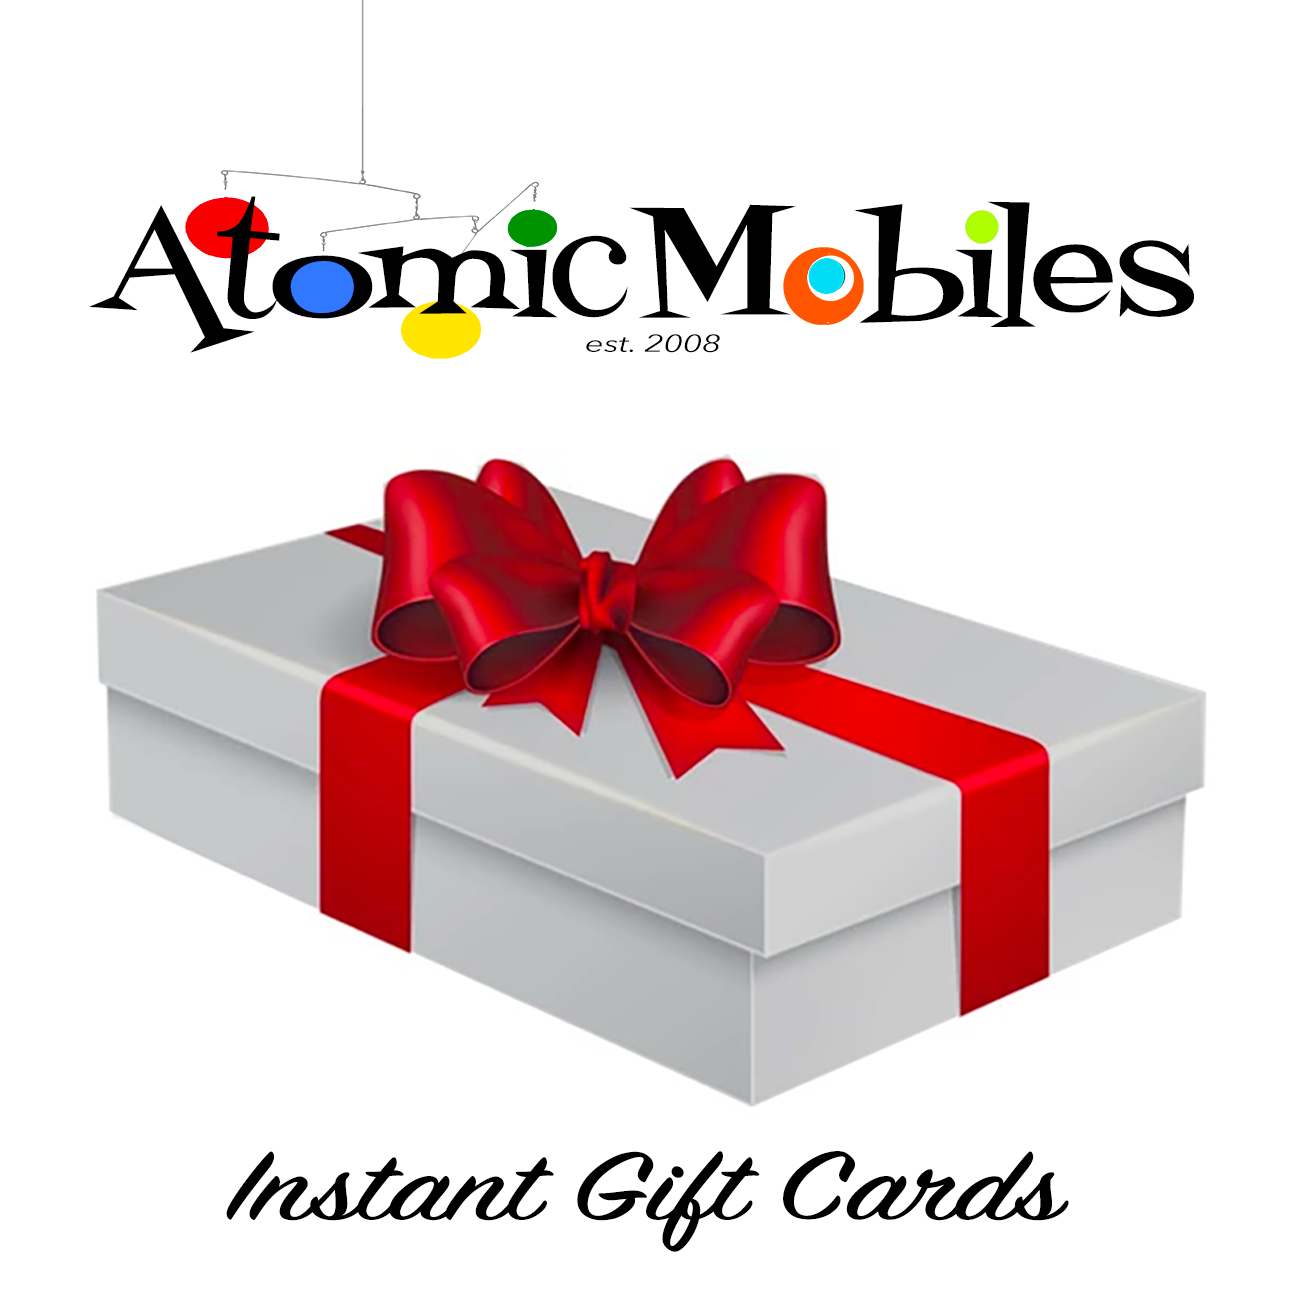 Delight the mid century modern enthusiasts in your life with the gift of kinetic art! Give an Atomic Mobiles Gift Card. They  are issued instantly by email - perfect for last minute shopping! Only at AtomicMobiles.com